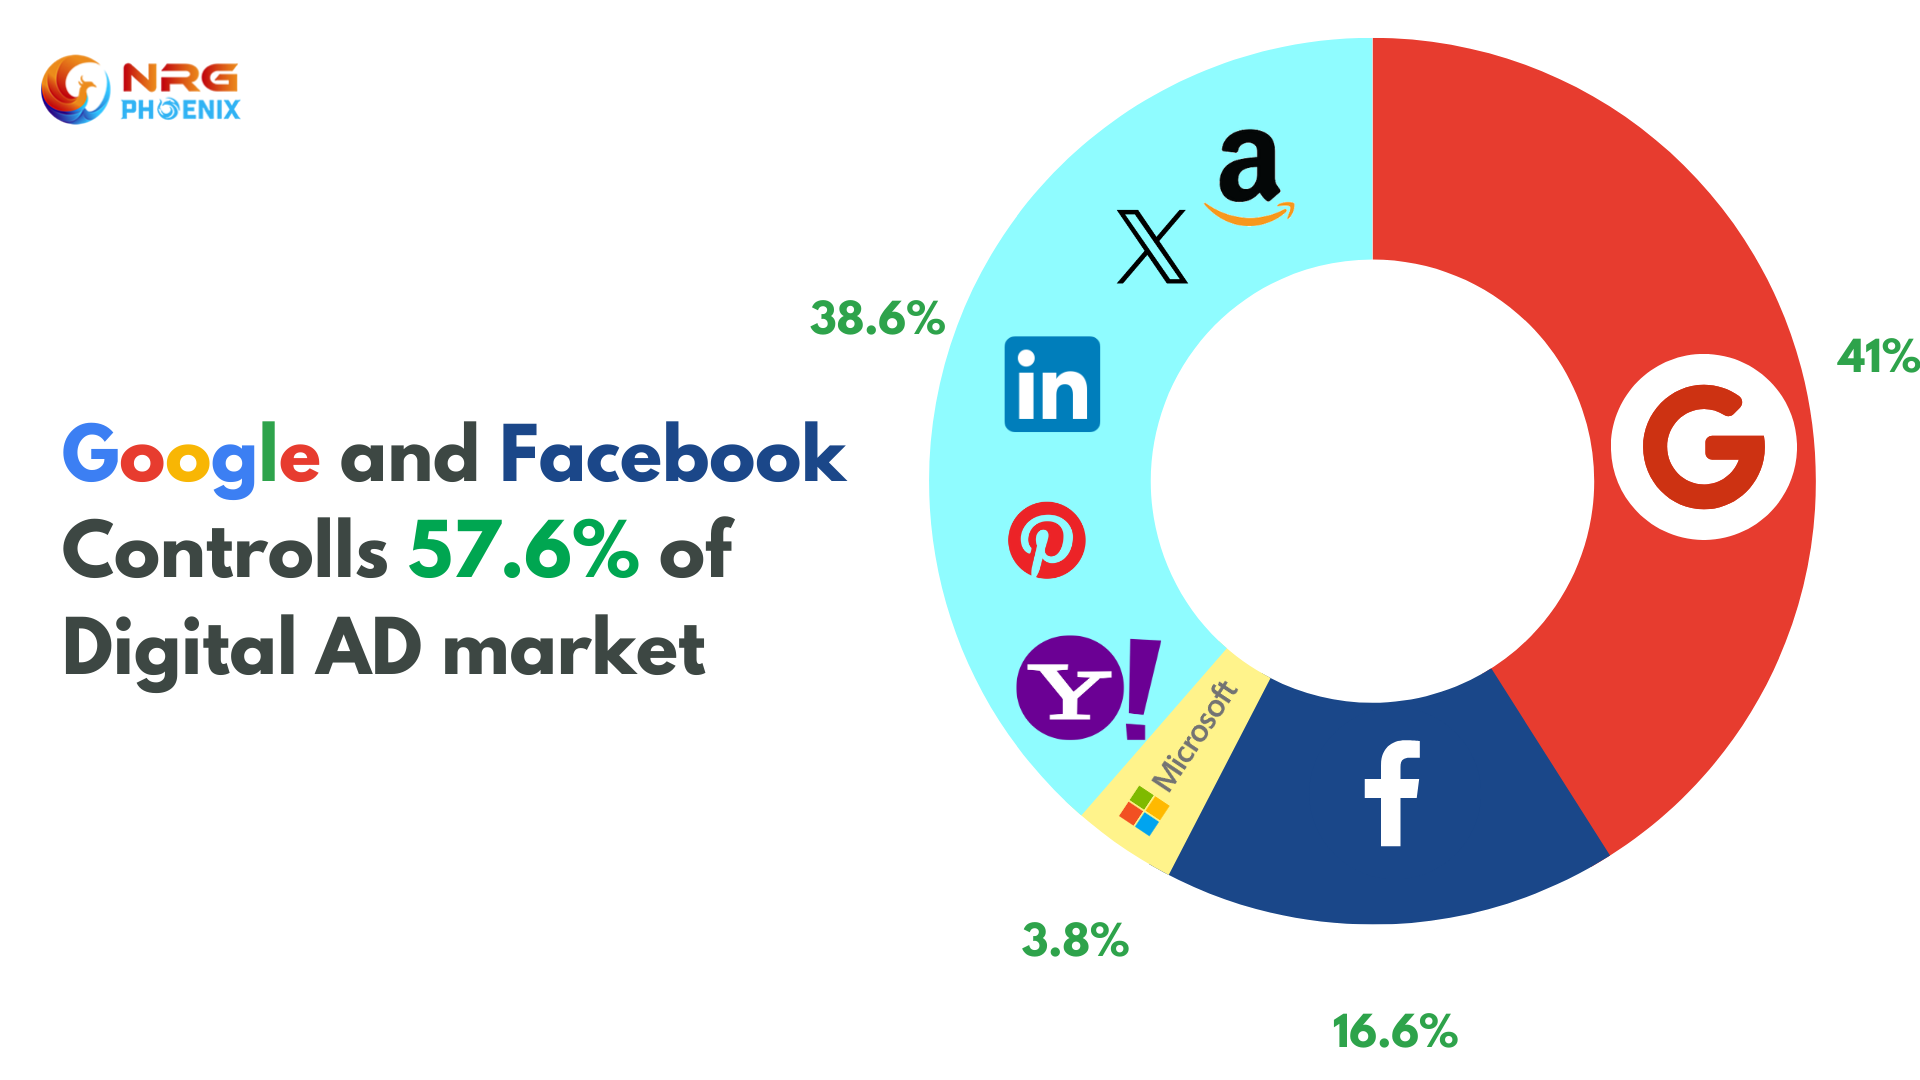 Advertising Statistics and Market Share of Google and Facebook image